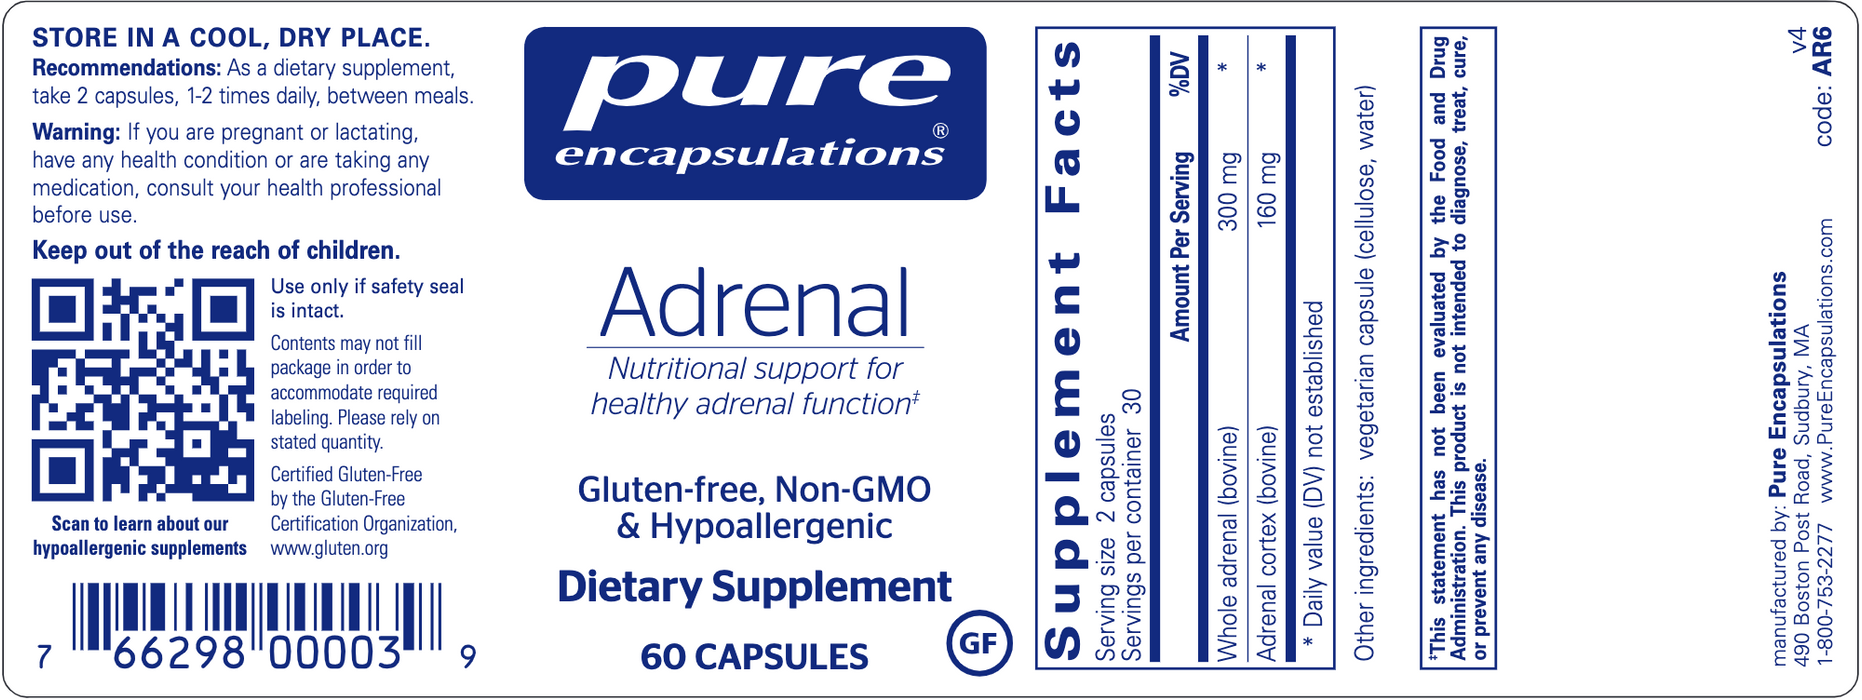 Adrenal (60 Capsules)-Vitamins & Supplements-Pure Encapsulations-Pine Street Clinic